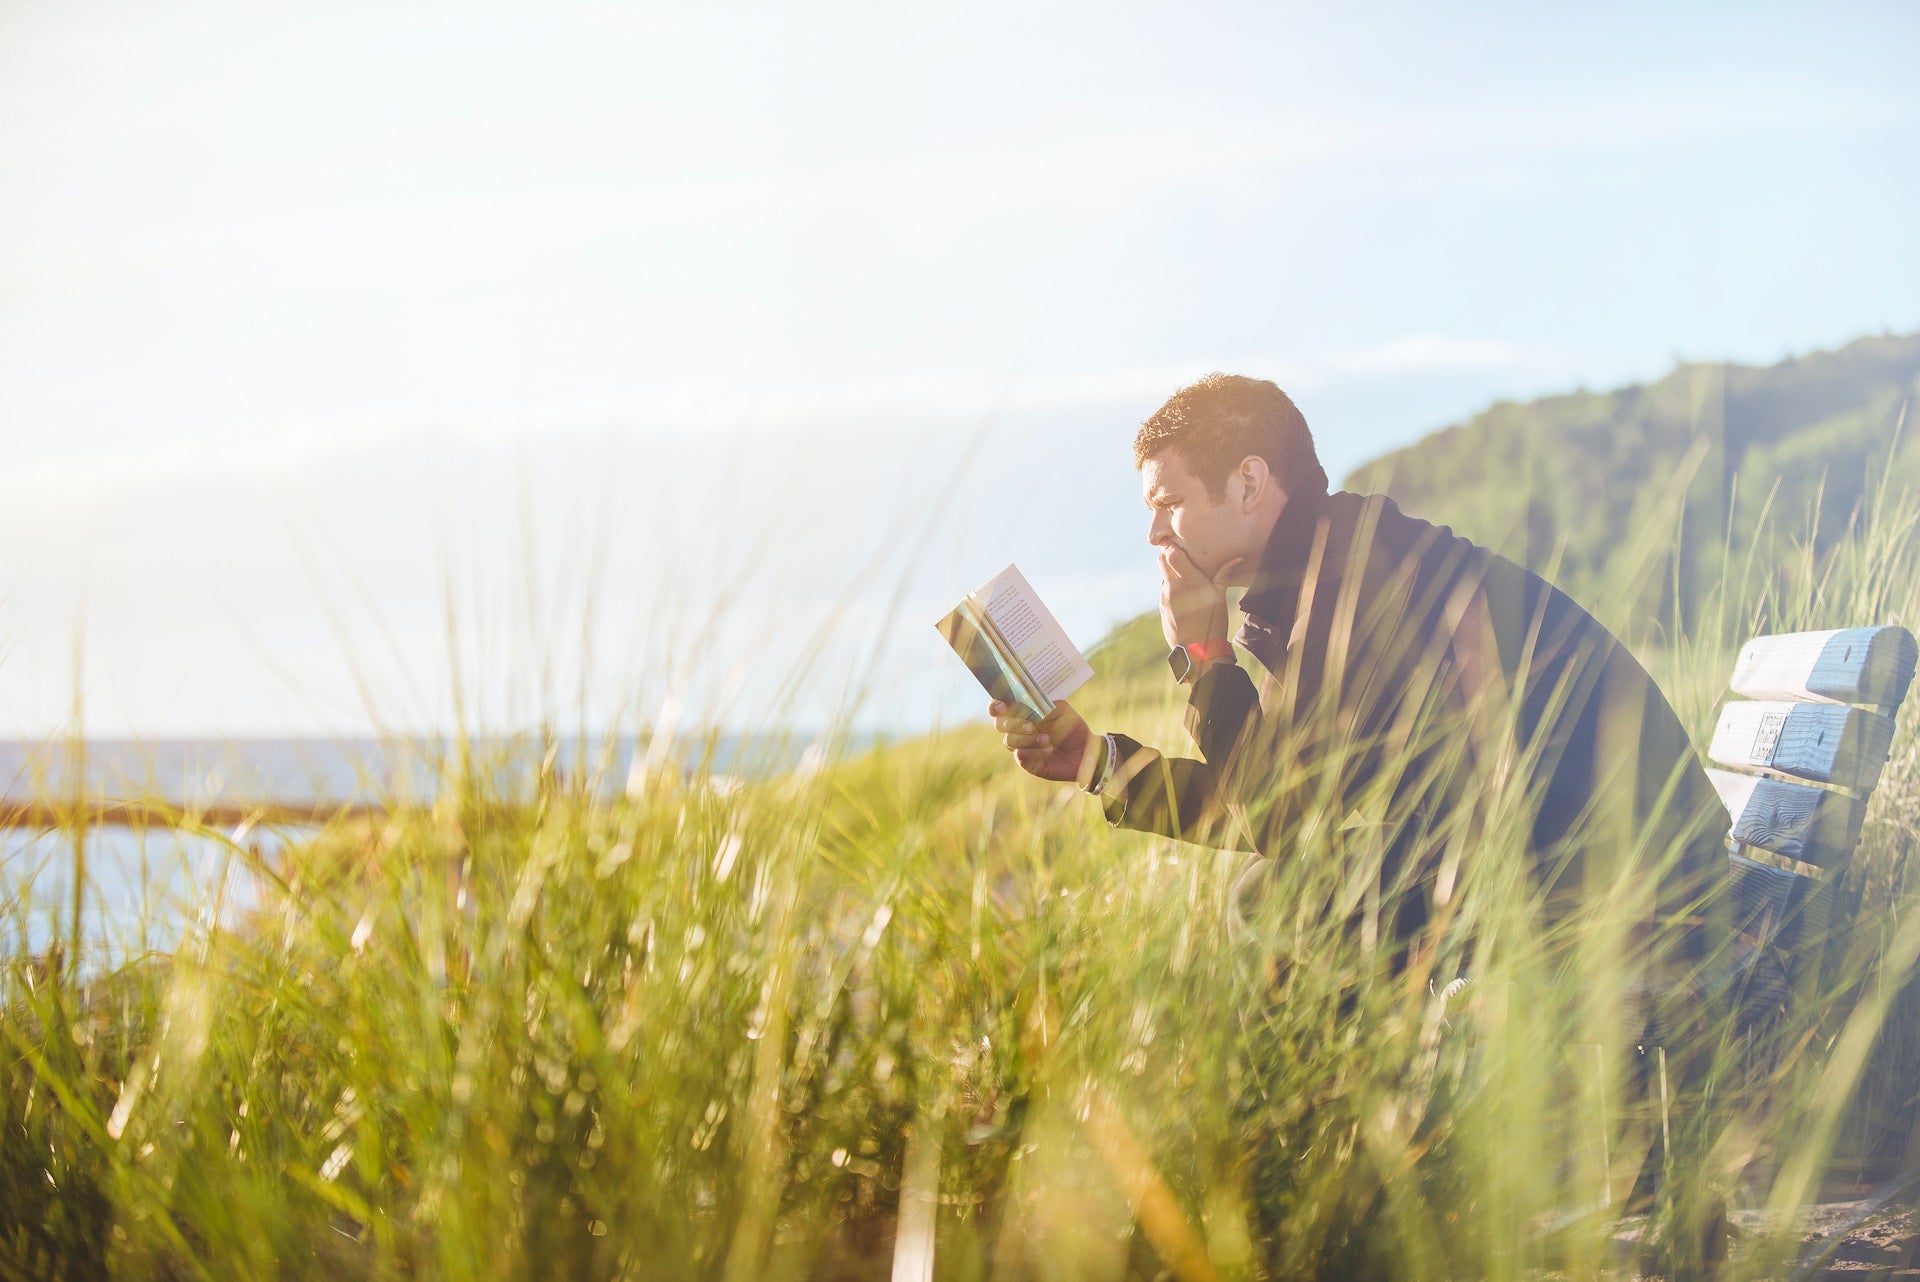 5 Books to Build Your Faith This Summer